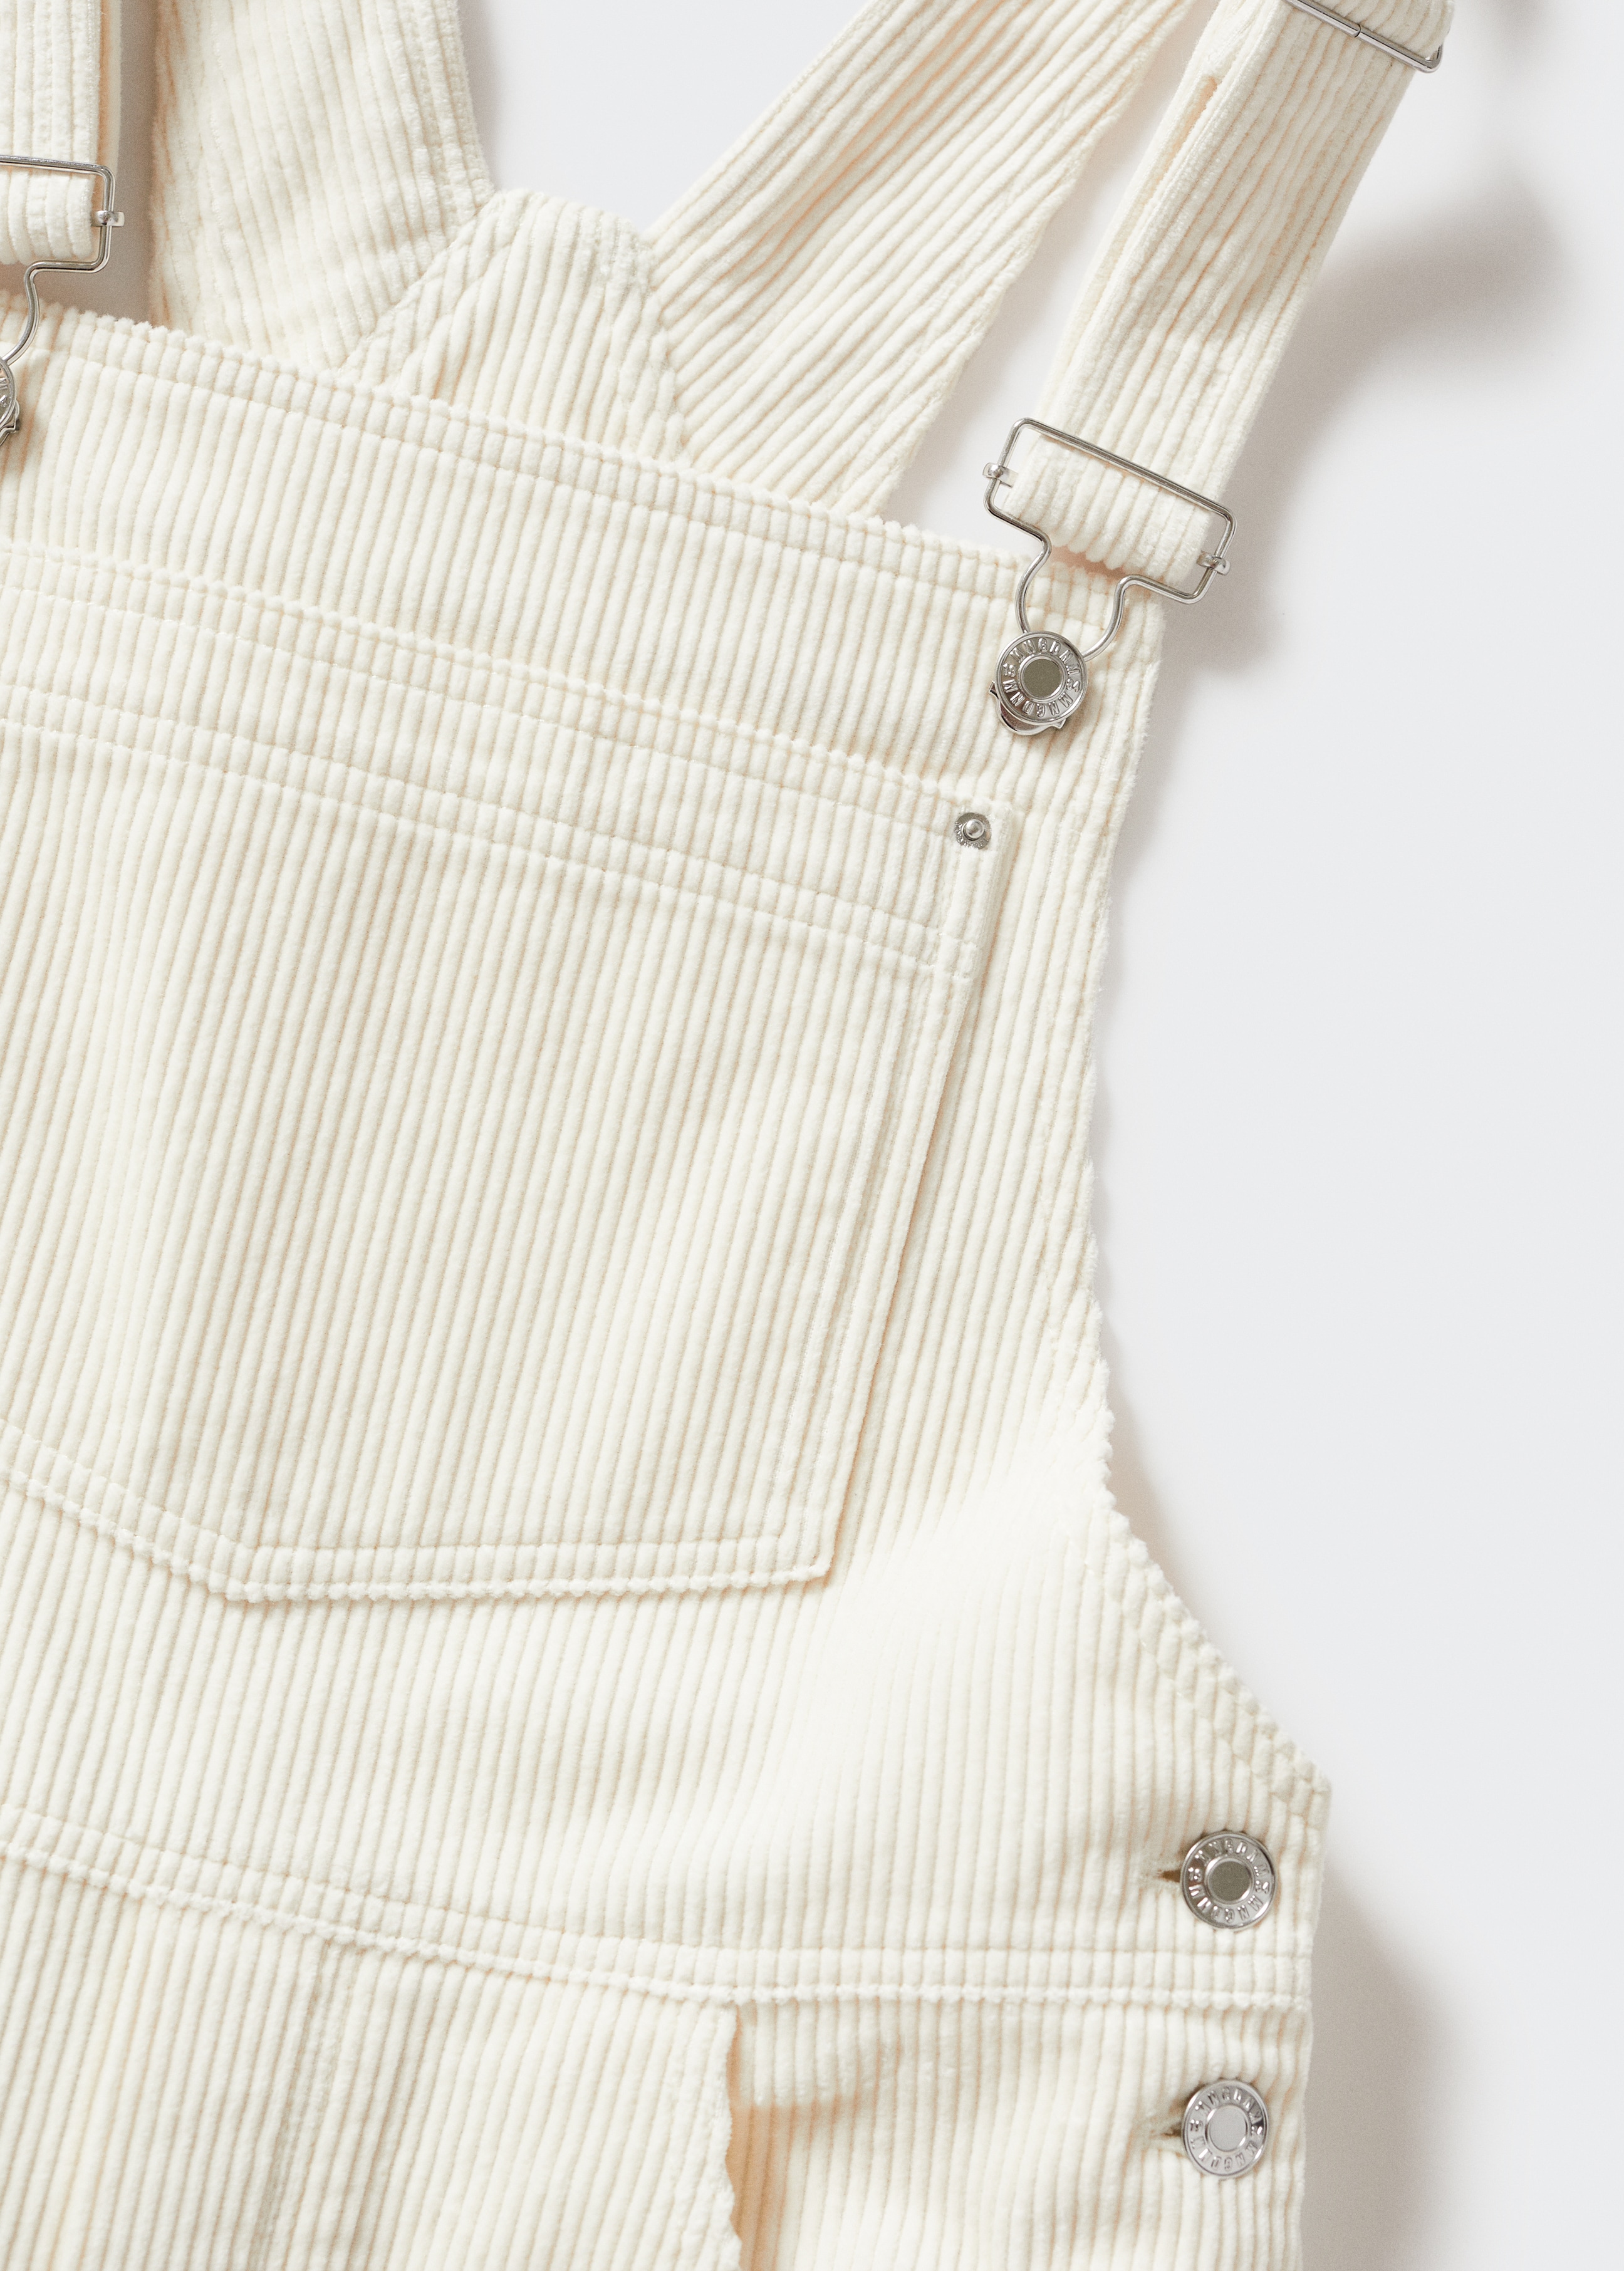 Corduroy dungarees - Details of the article 8